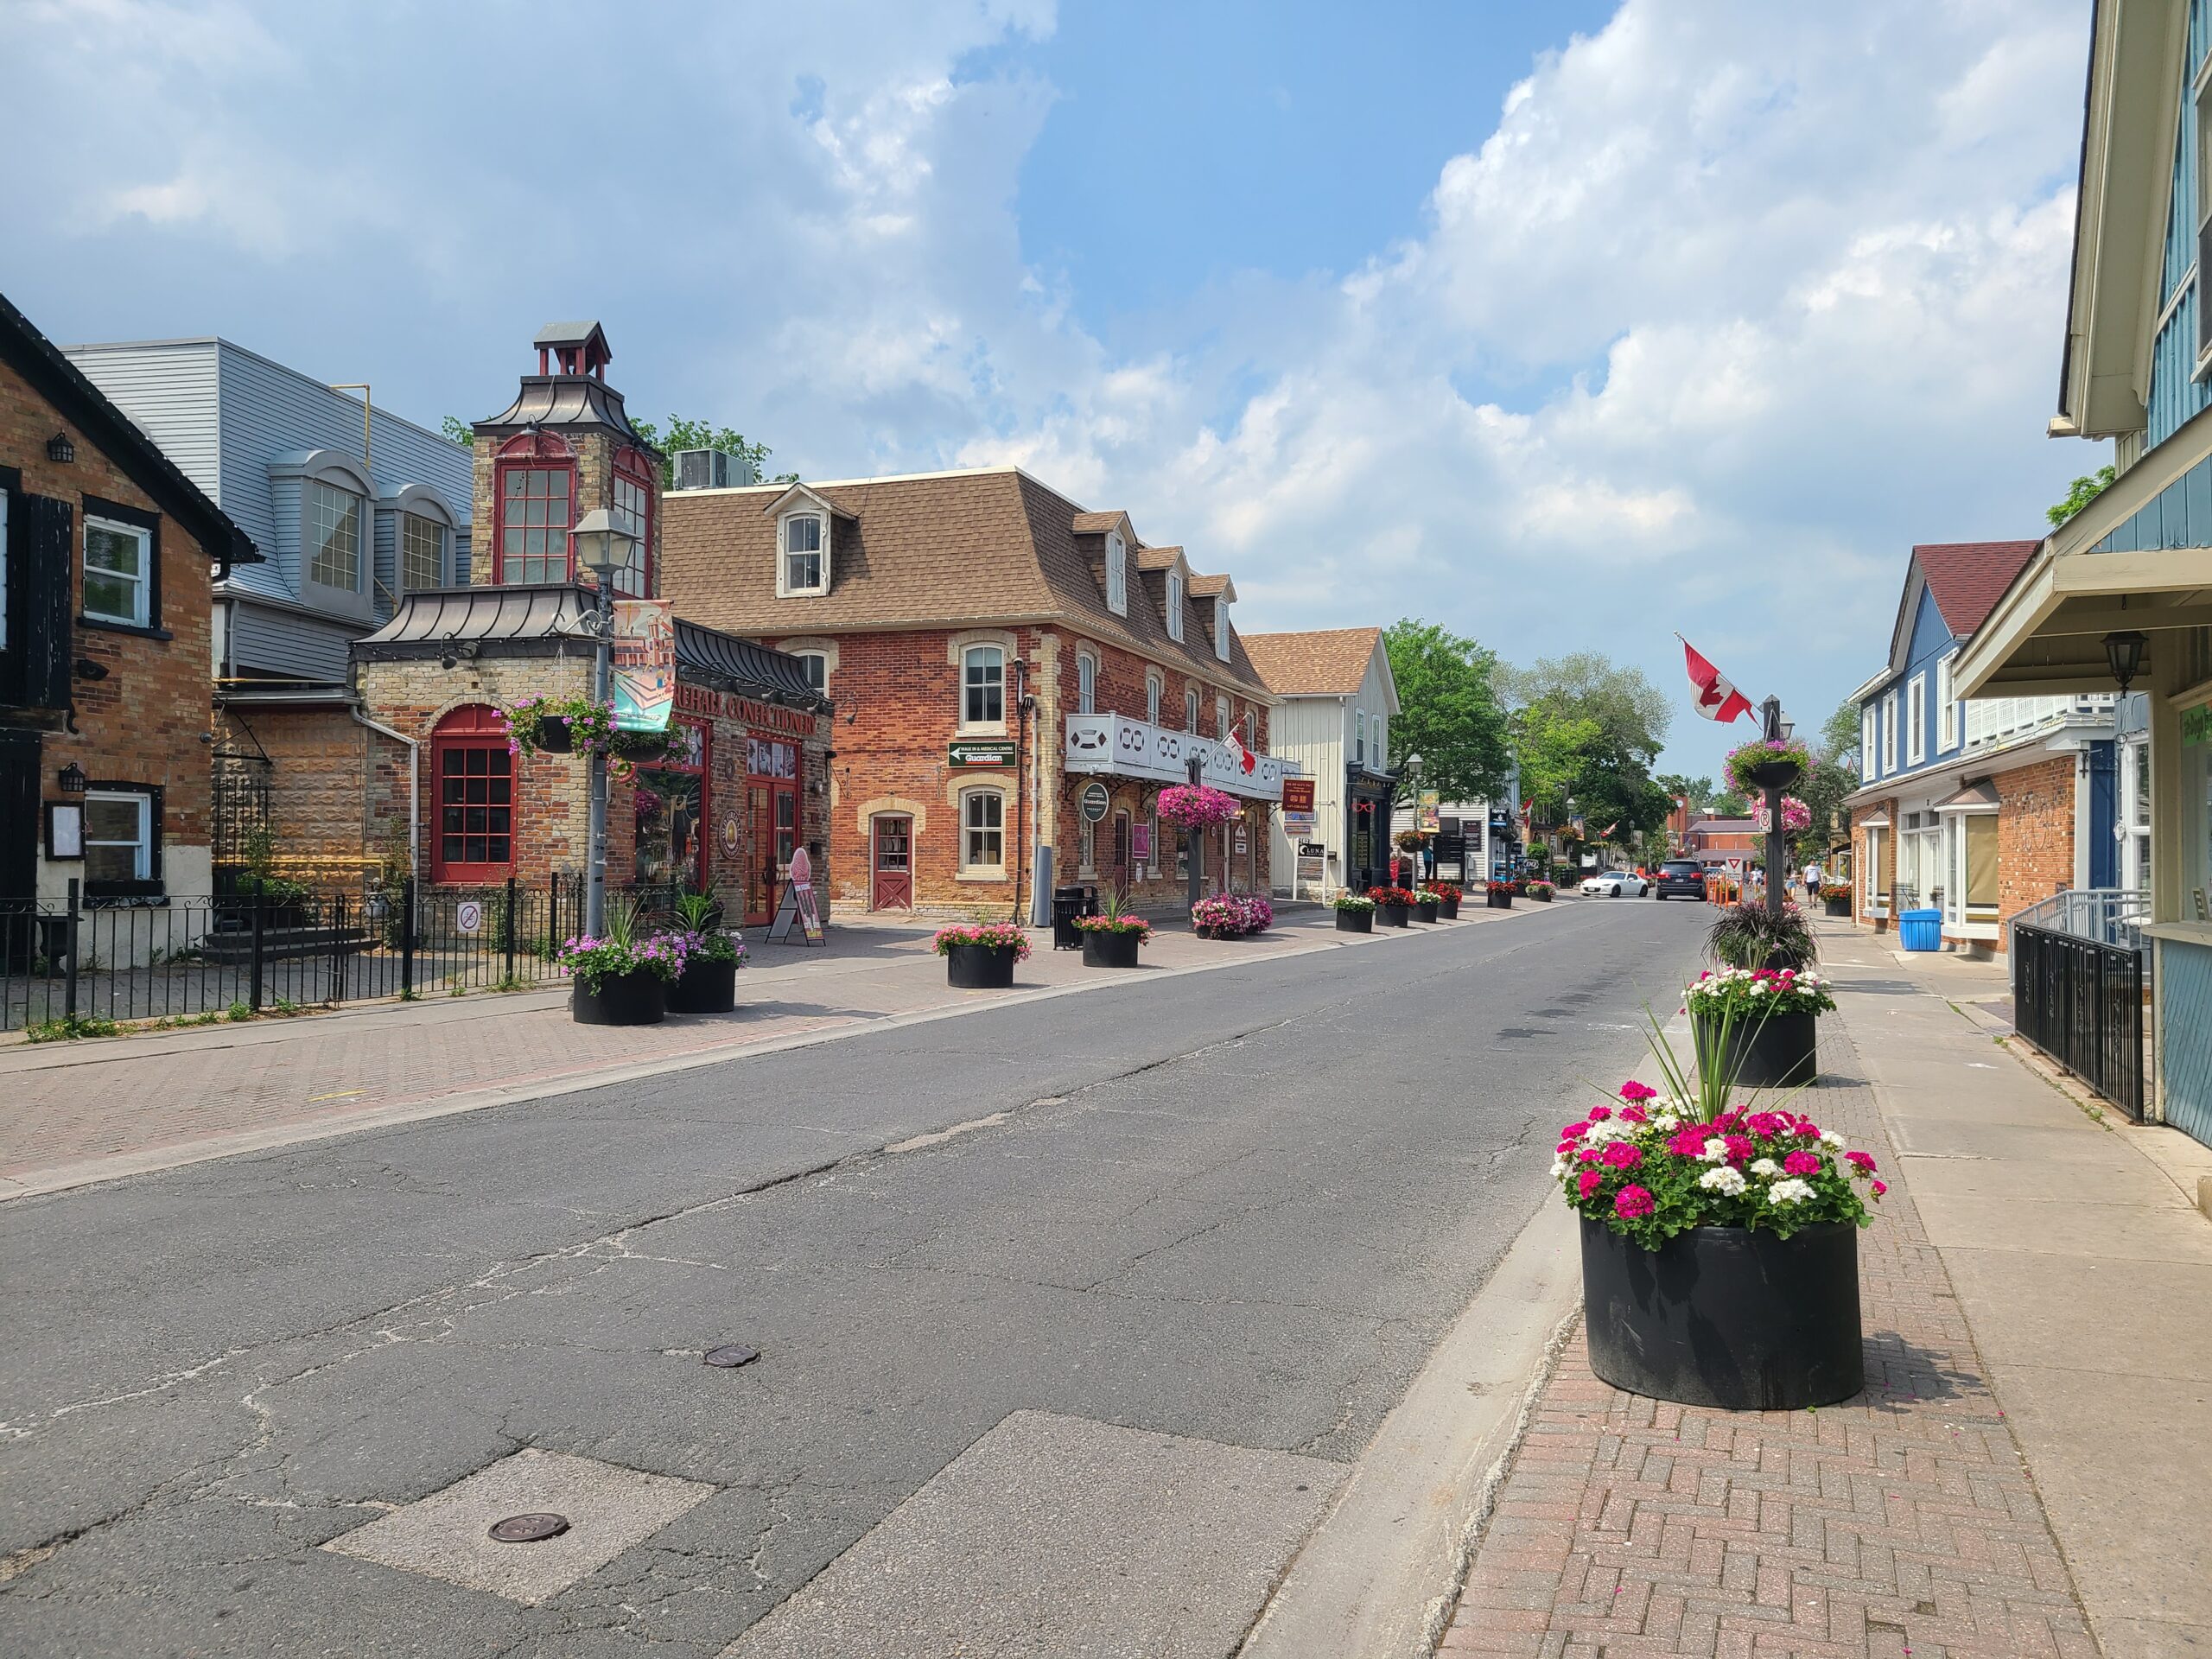 Beautiful Main Street Unionville with historic buildings and flowers lining the street